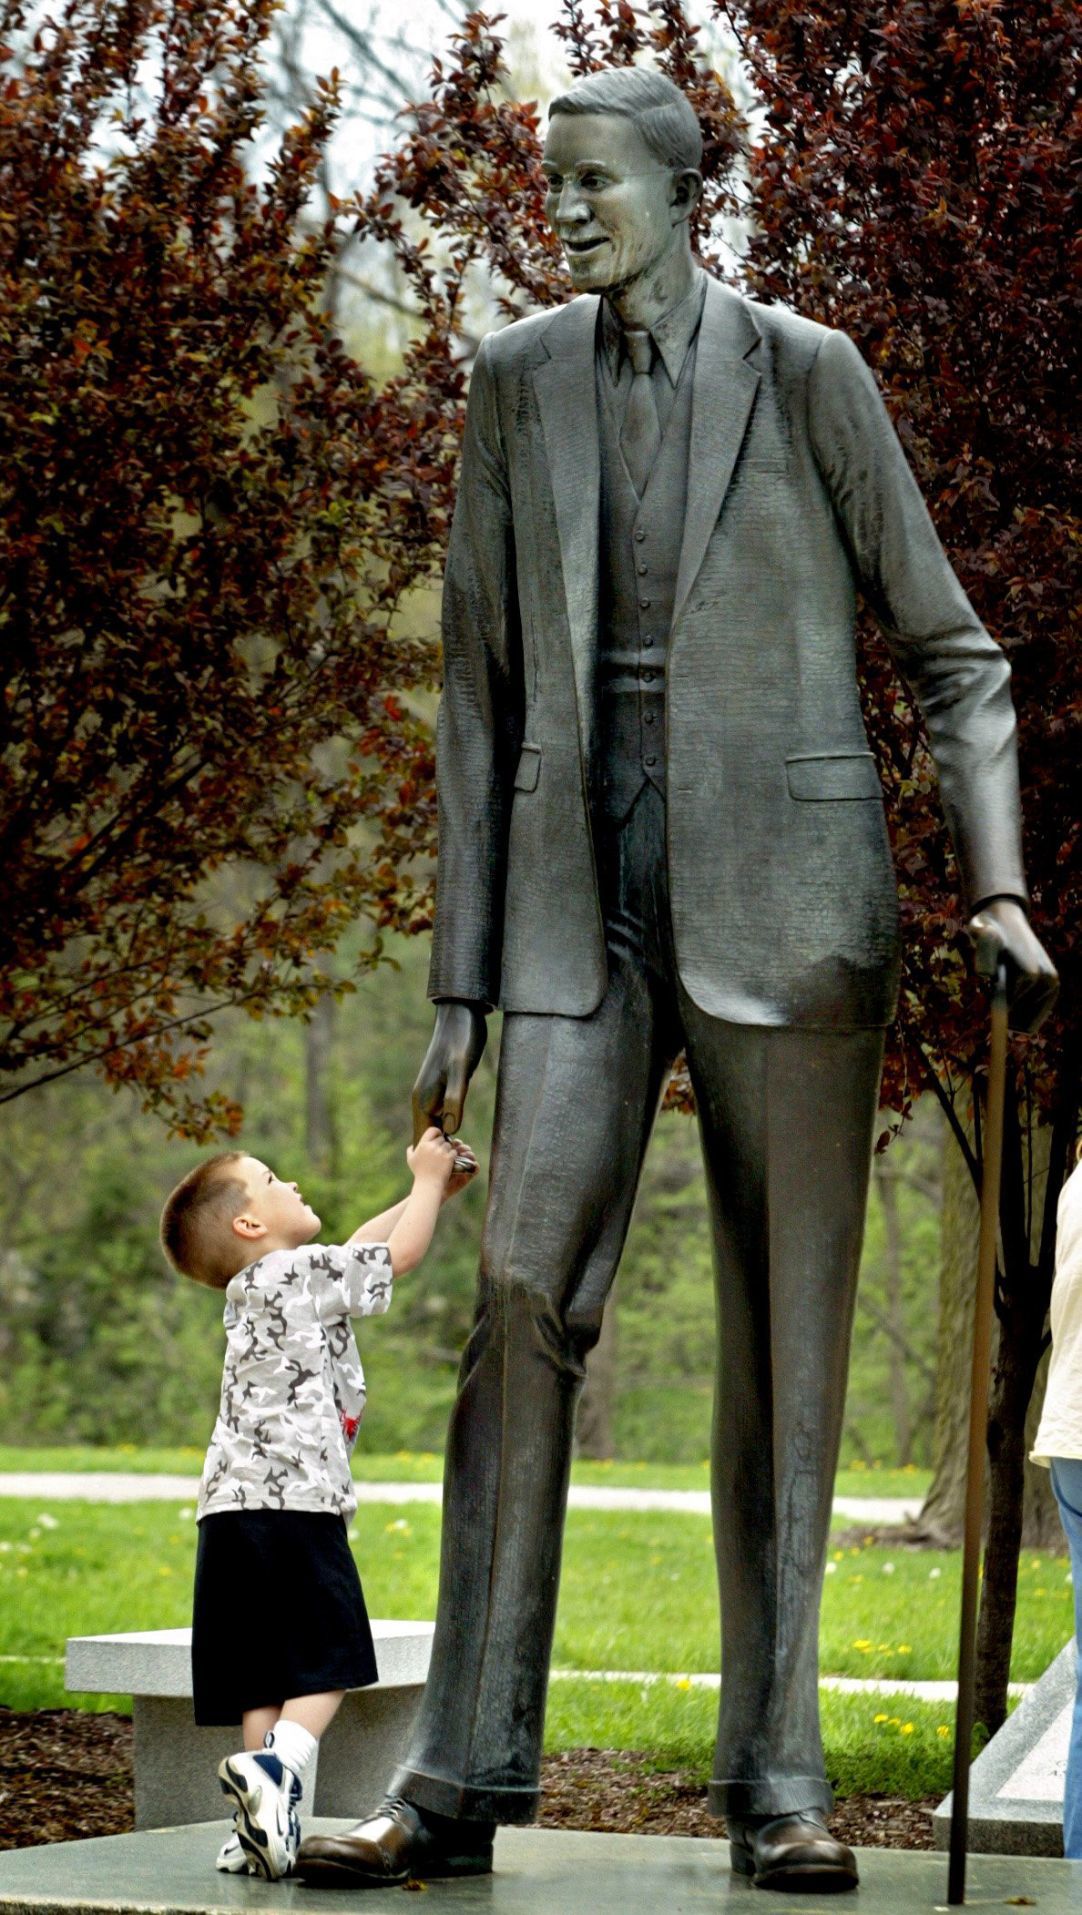 100 Facts About Alton S Gentle Giant Robert Wadlow Lifestyles Stltoday Com